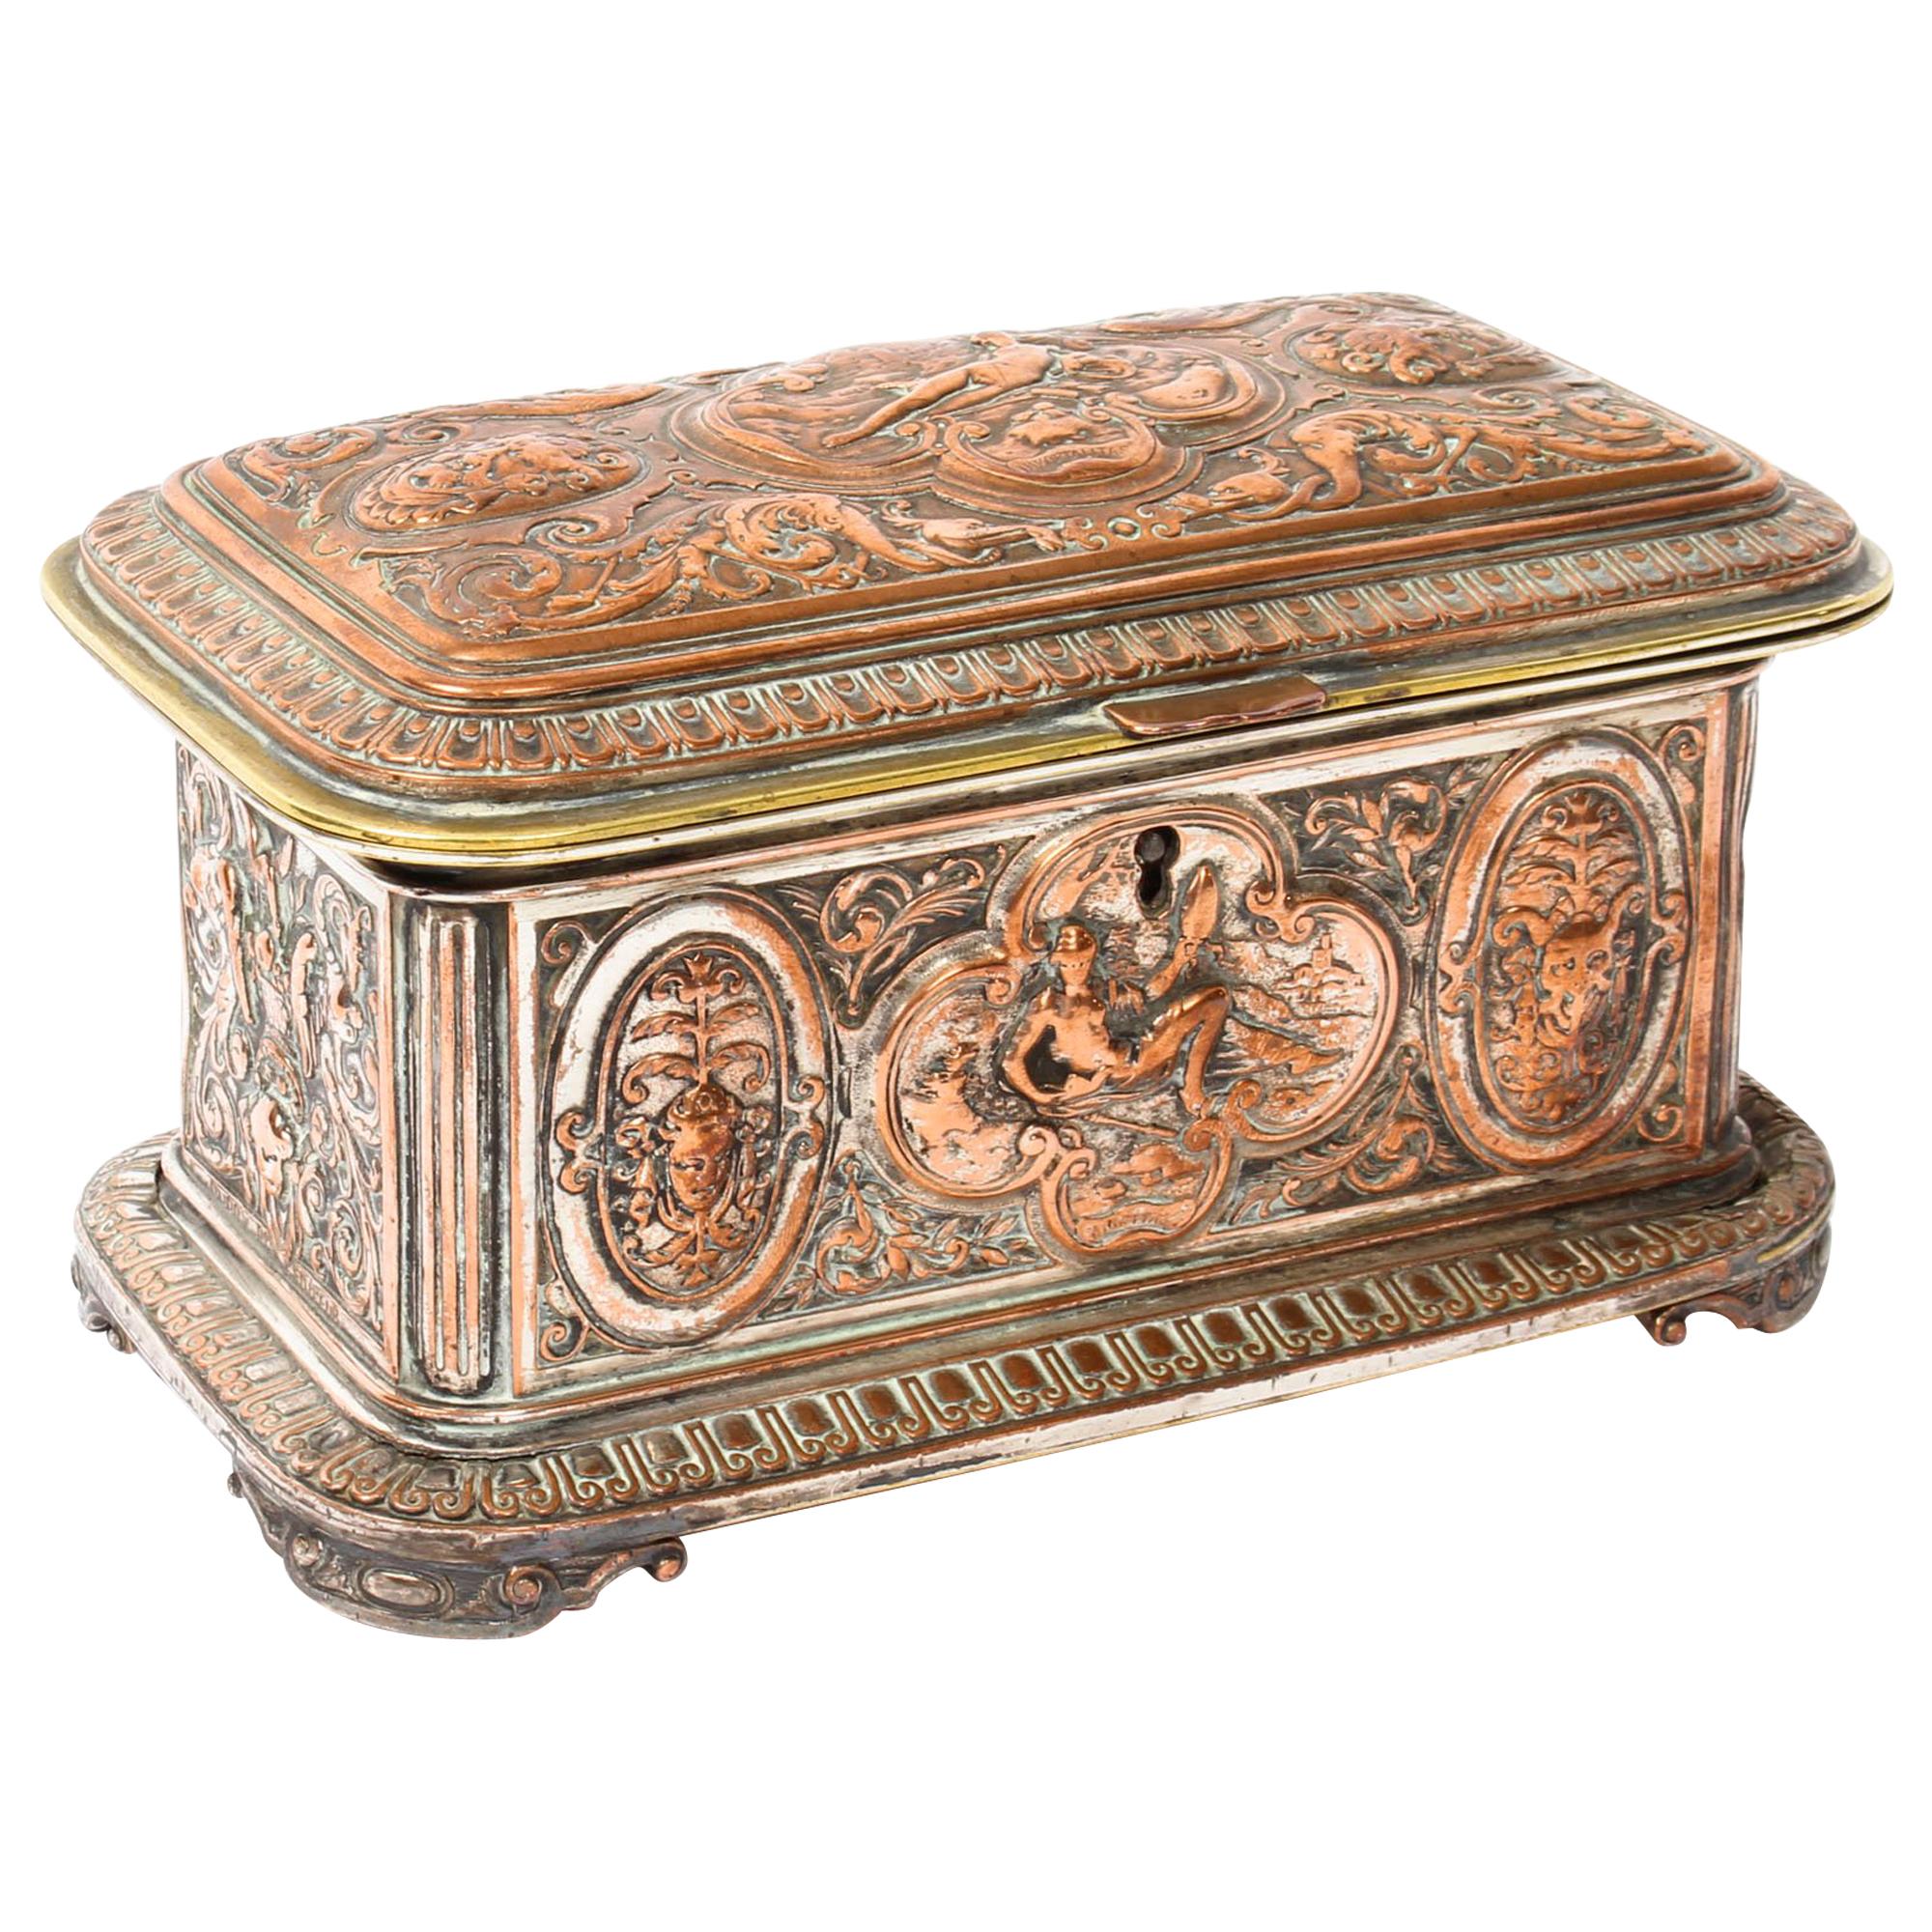 Antique French Gilt and Copper Casket 19th Century